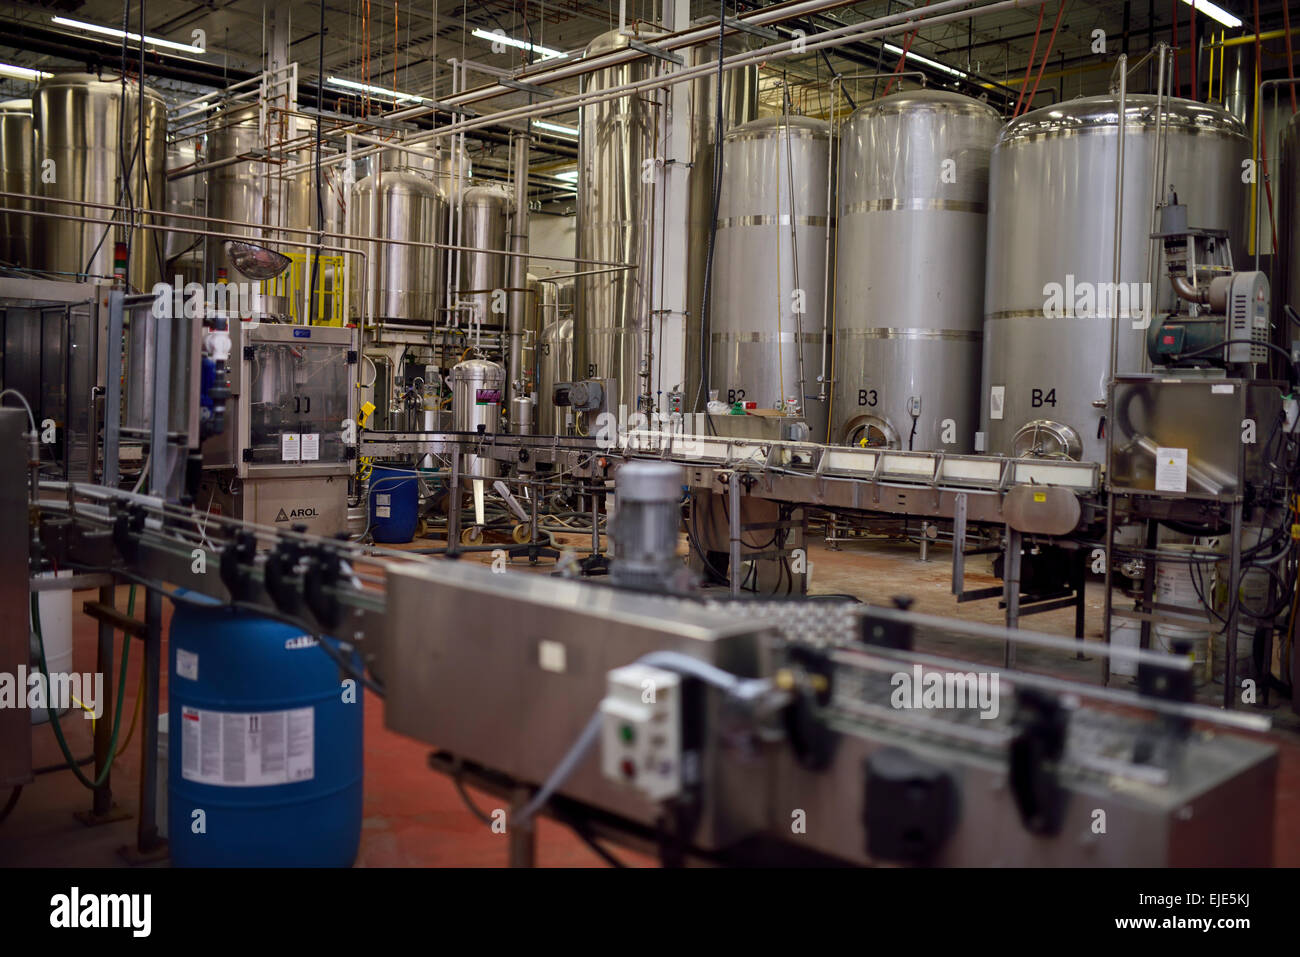 Beer assembly line conveyor belt and brewing tanks in a brewery plant Toronto Stock Photo